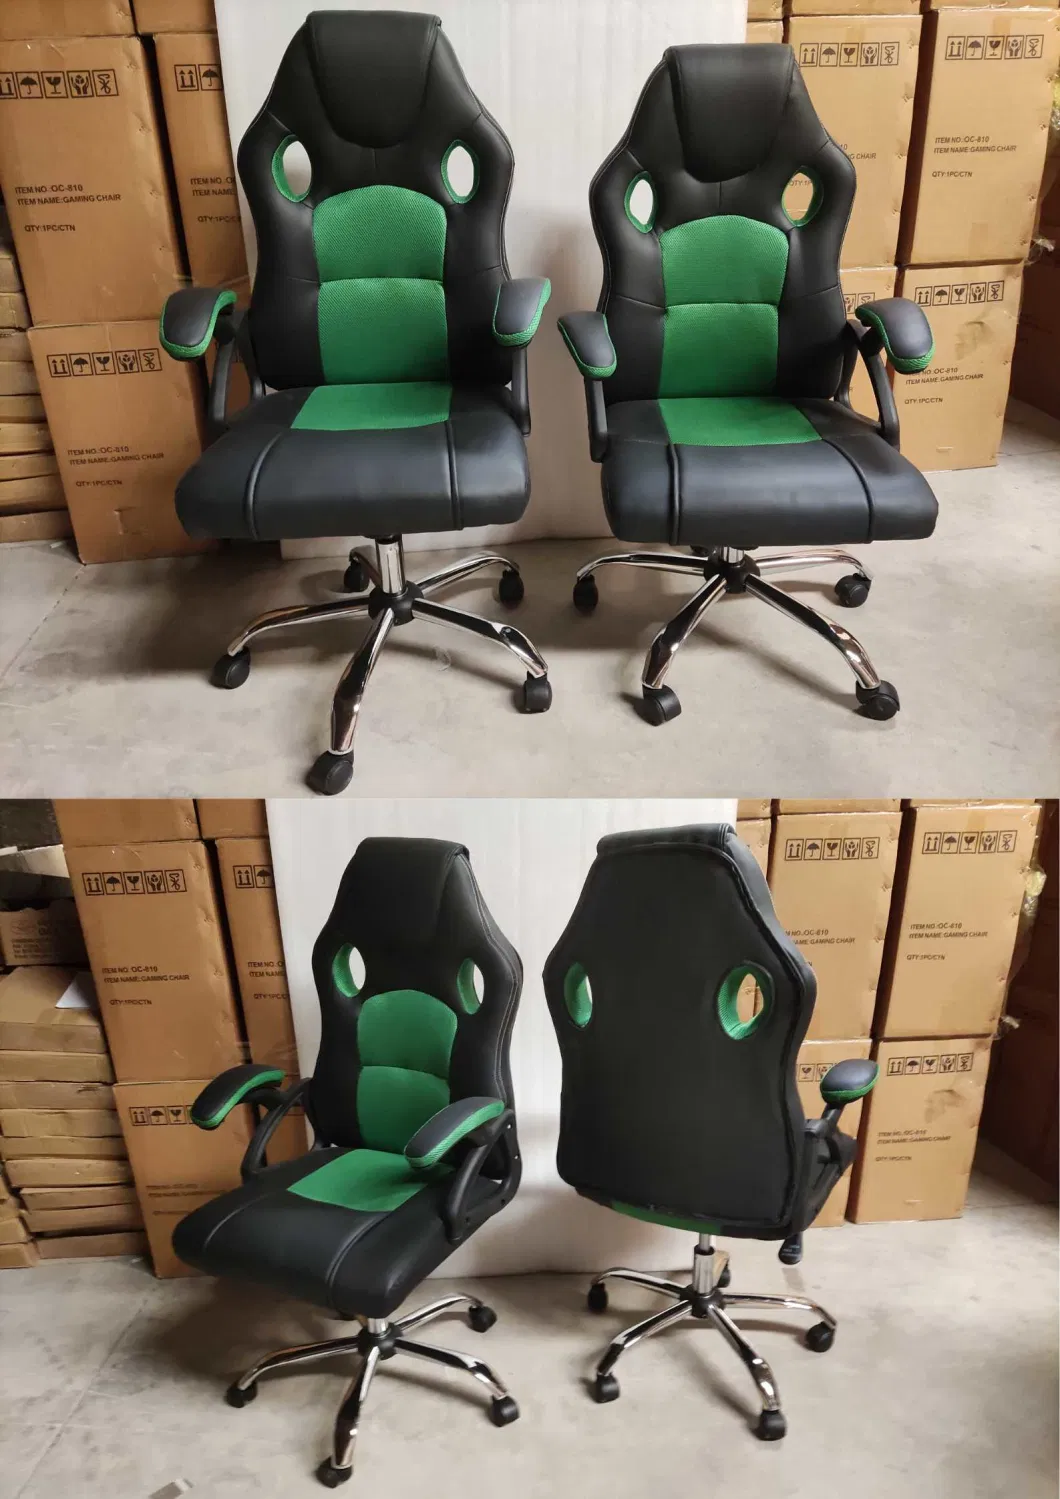 Best Price Fashion Modern Gaming Chair with LED Light Swiveling Dropshipping Professional Gaming Chair RGB